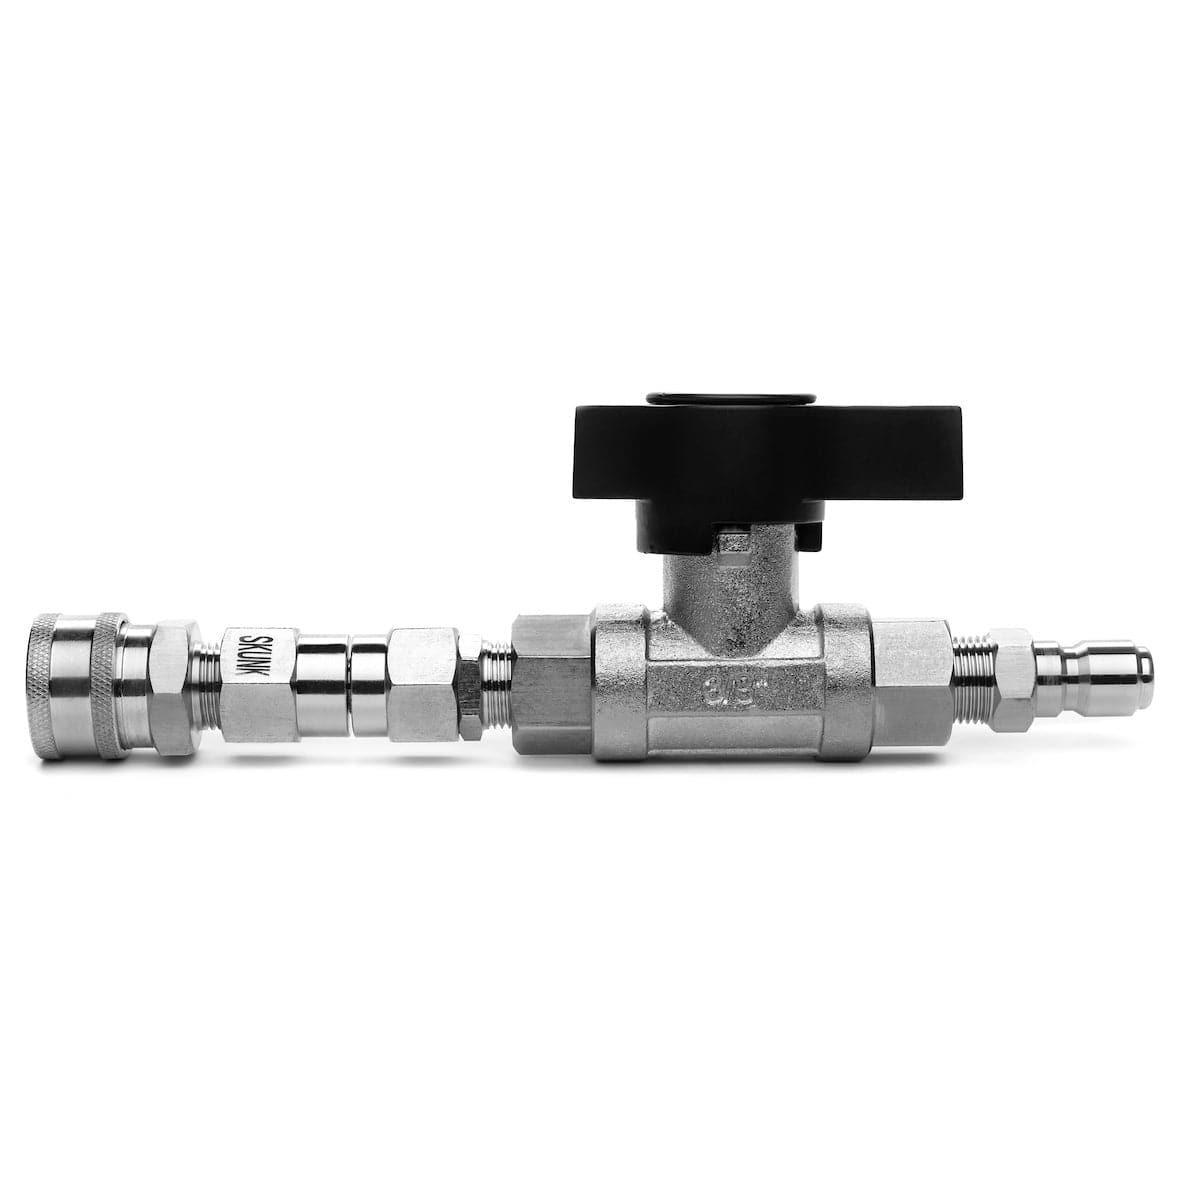 Southeast Softwash High Pressure 3/8 Ball Valve and SKUNK Swivel Combo Set | Assembled